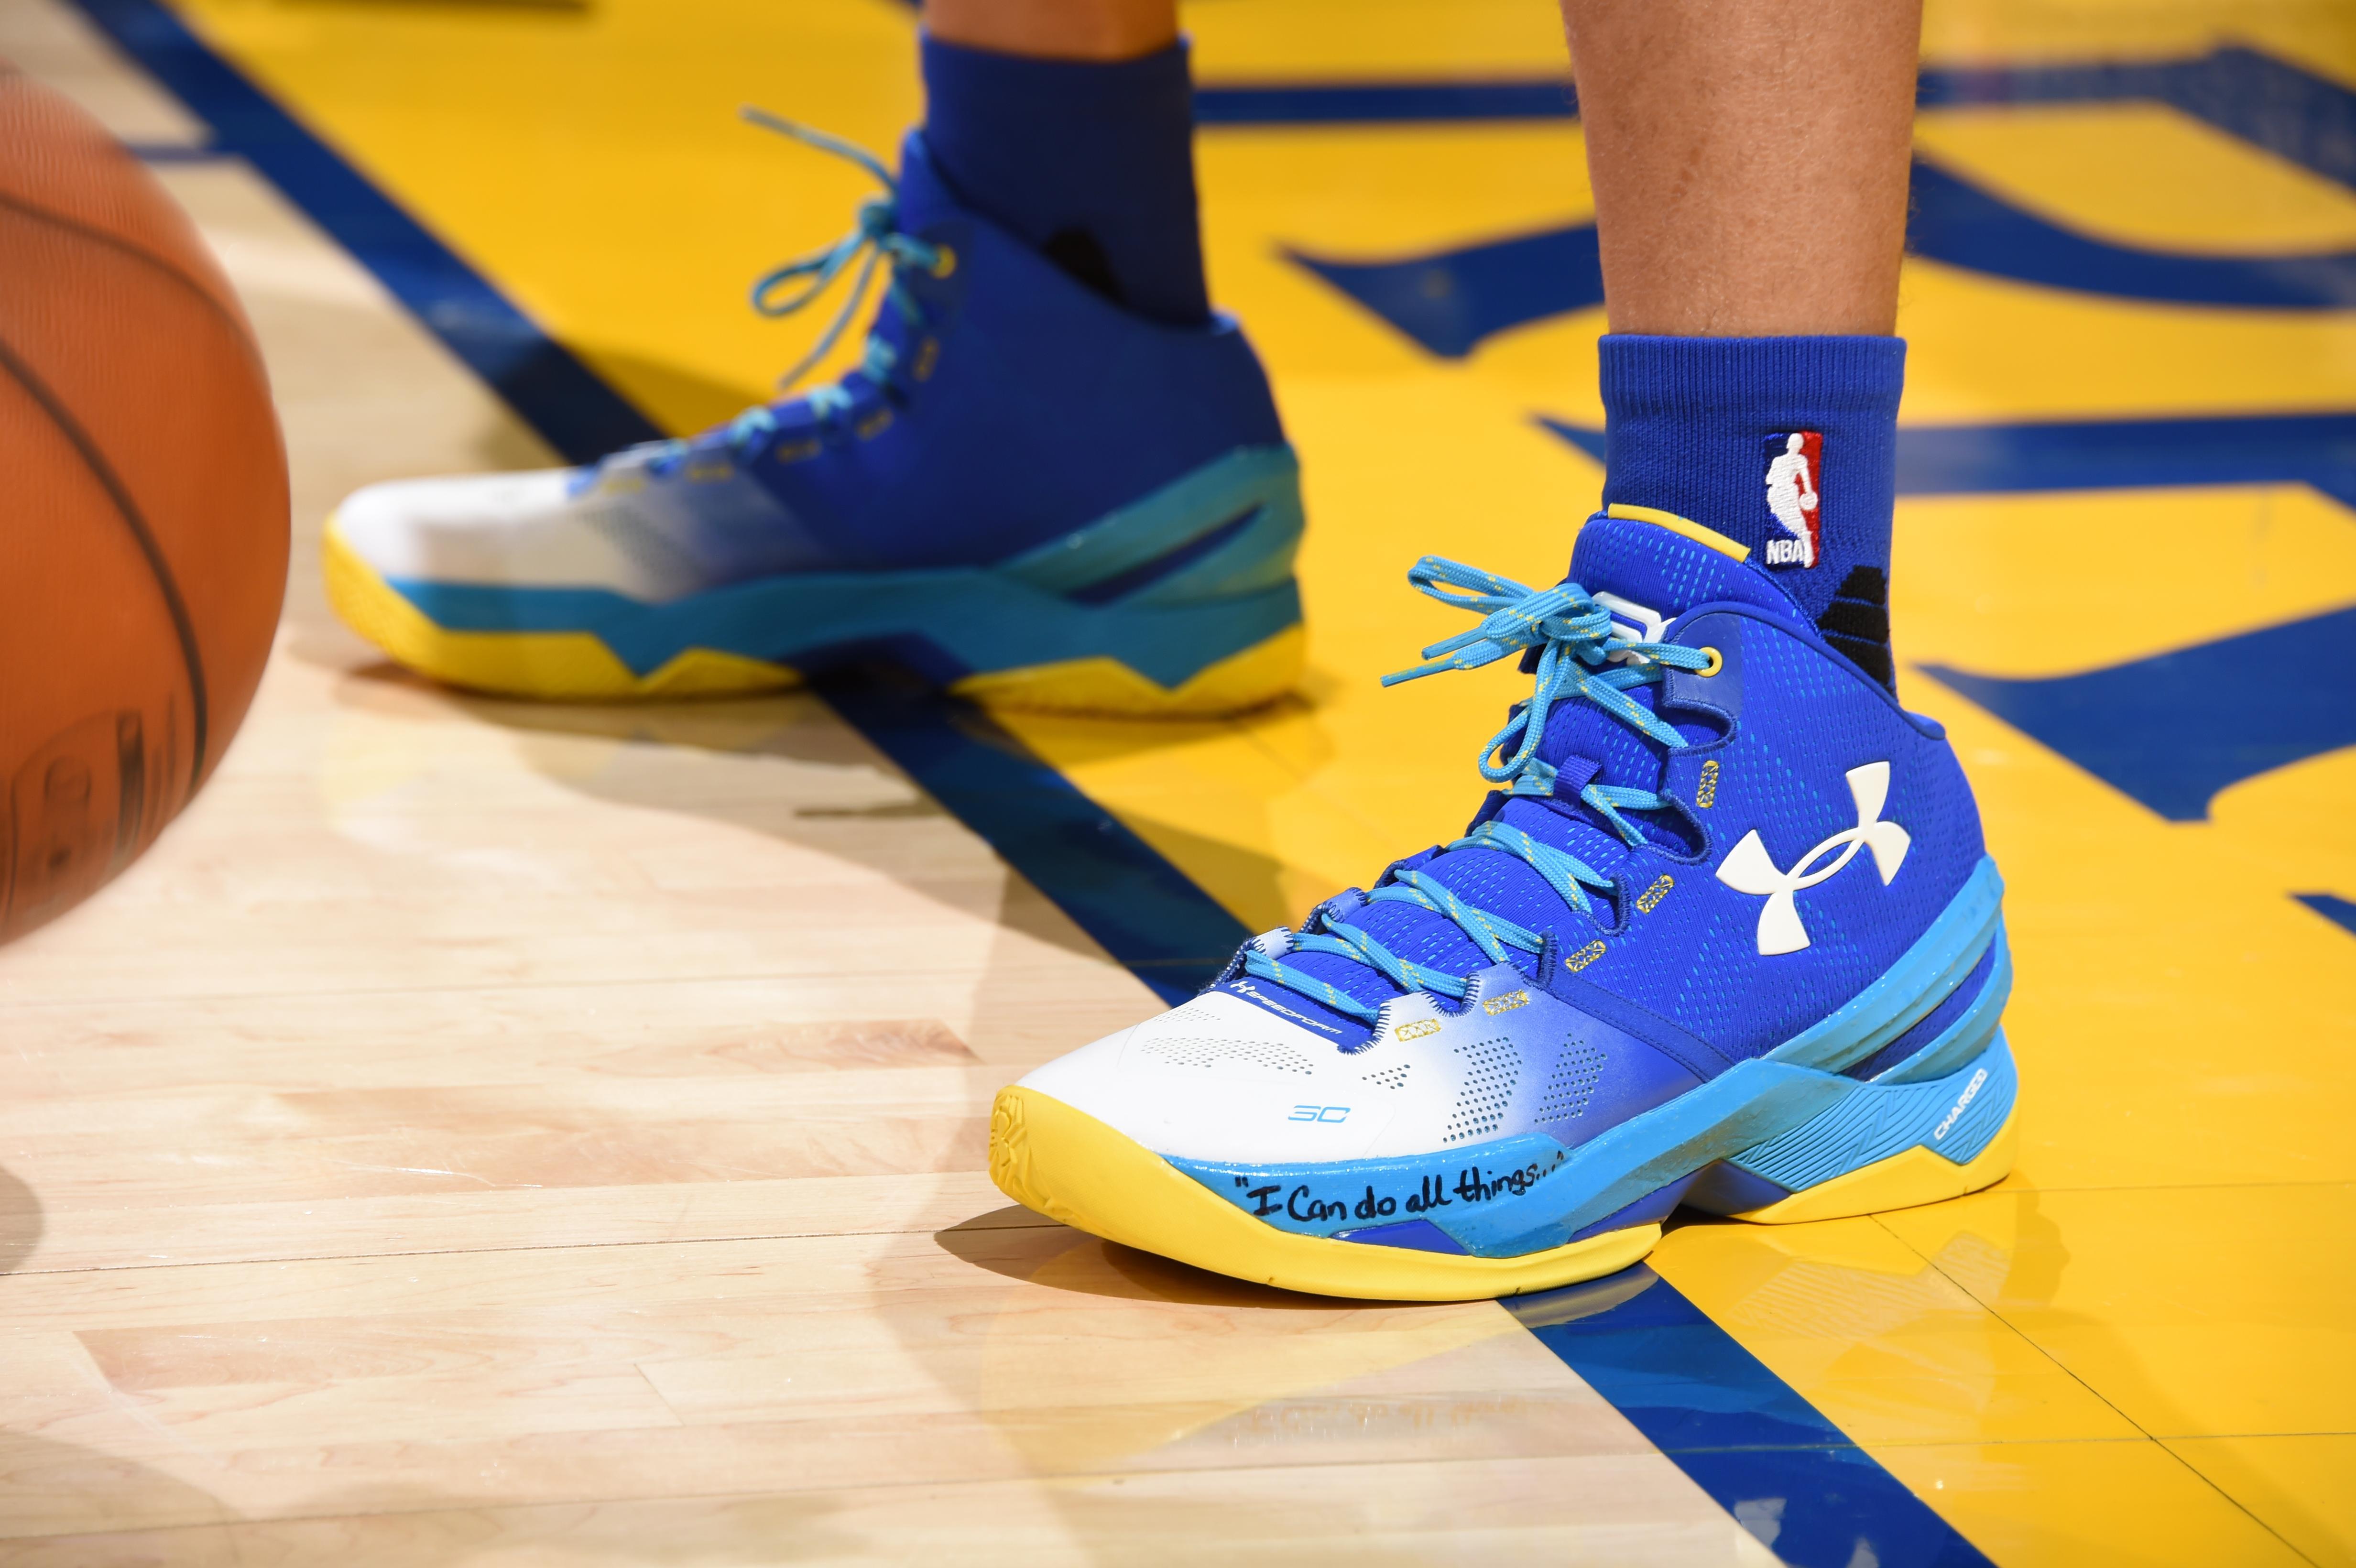 Steph Curry's Shoes Are Driving an Under Armour Revenue Surge